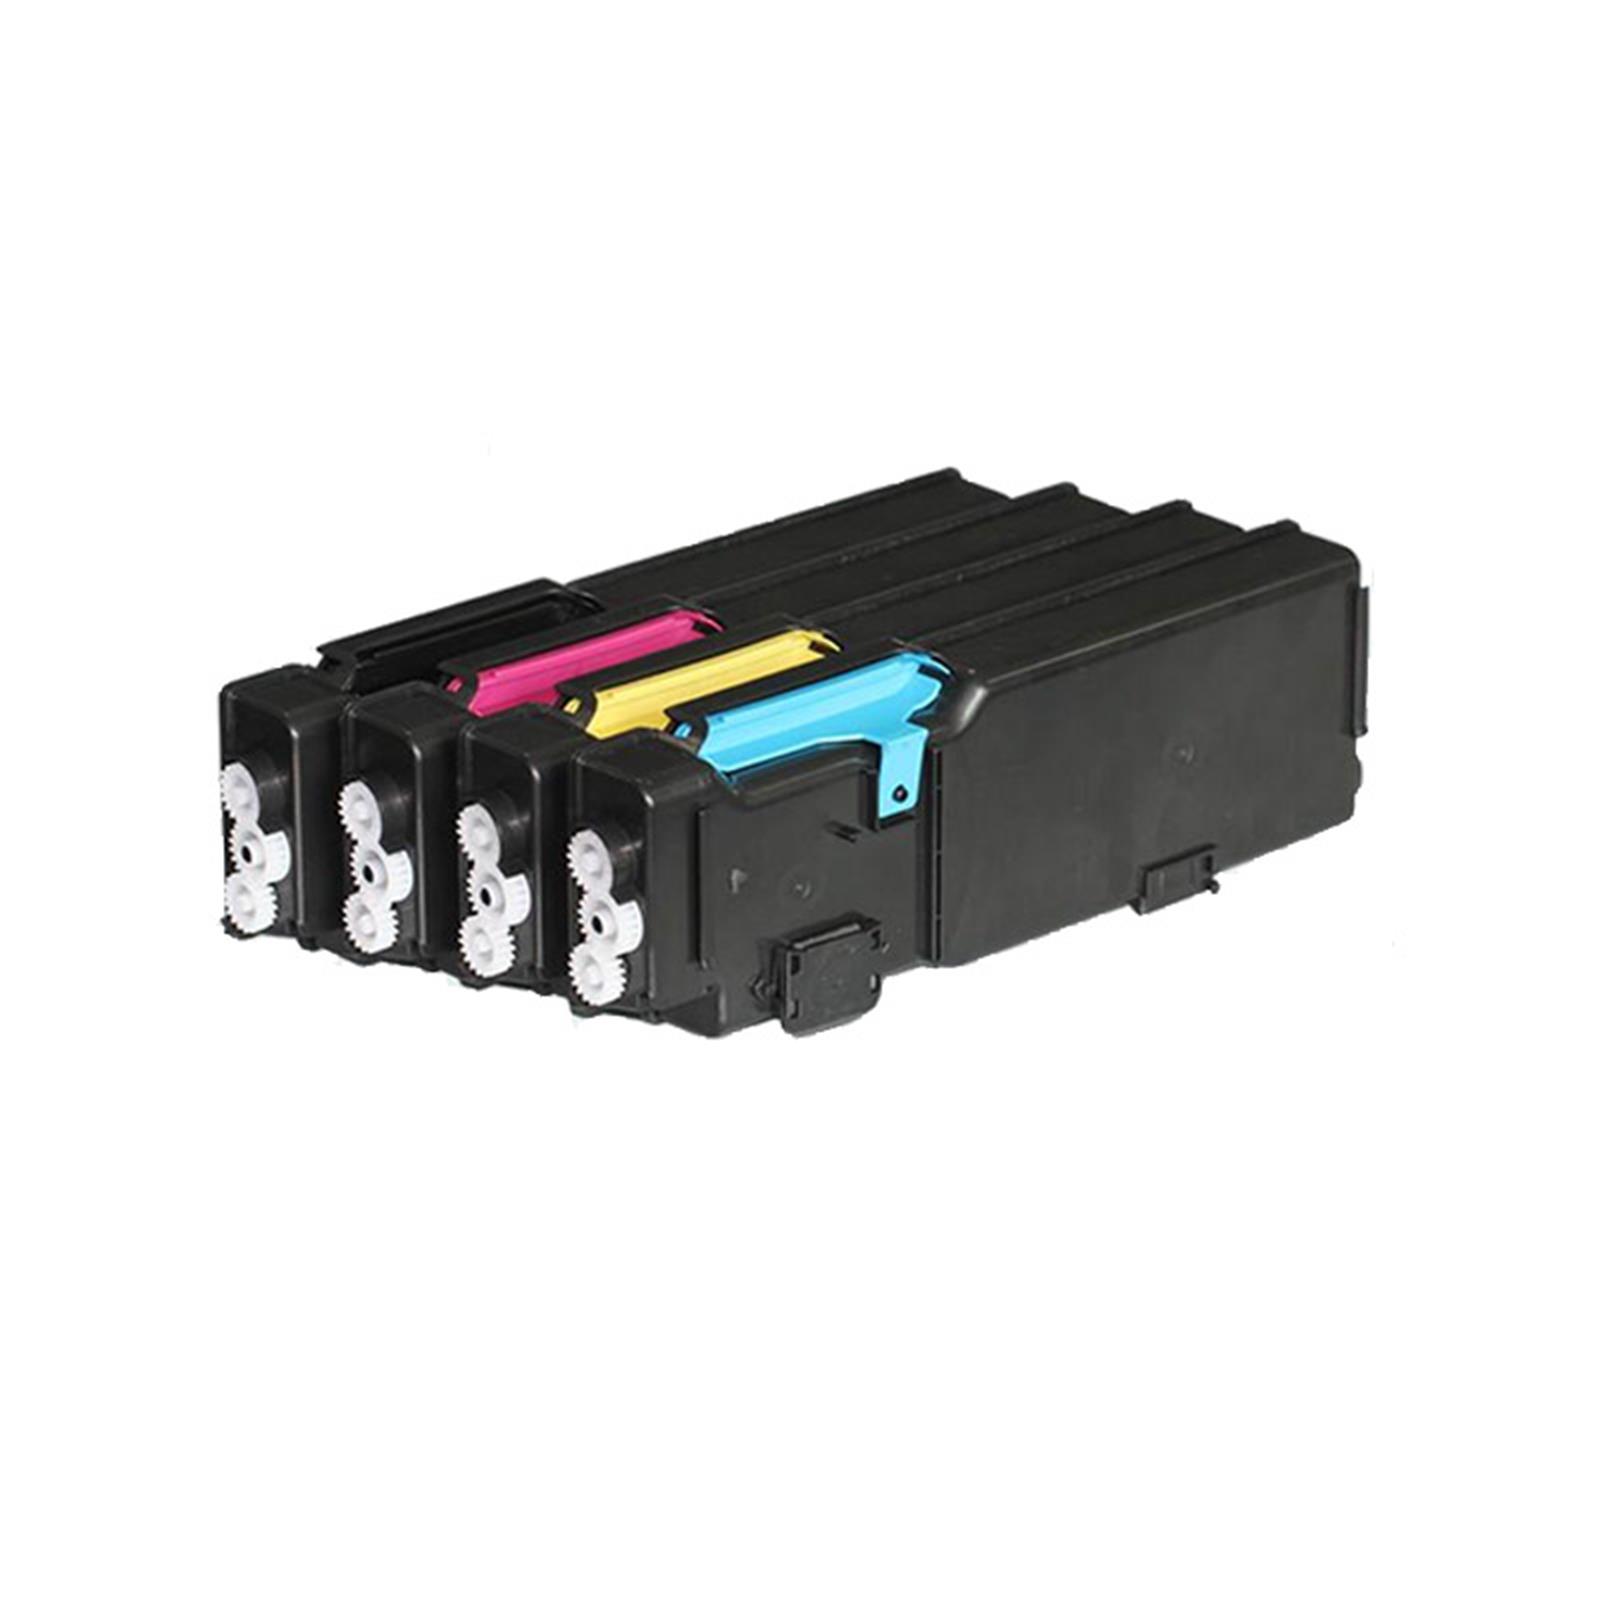 New Compatible Toner Cartridge for Dell S3840/3845 BK/C/M/Y